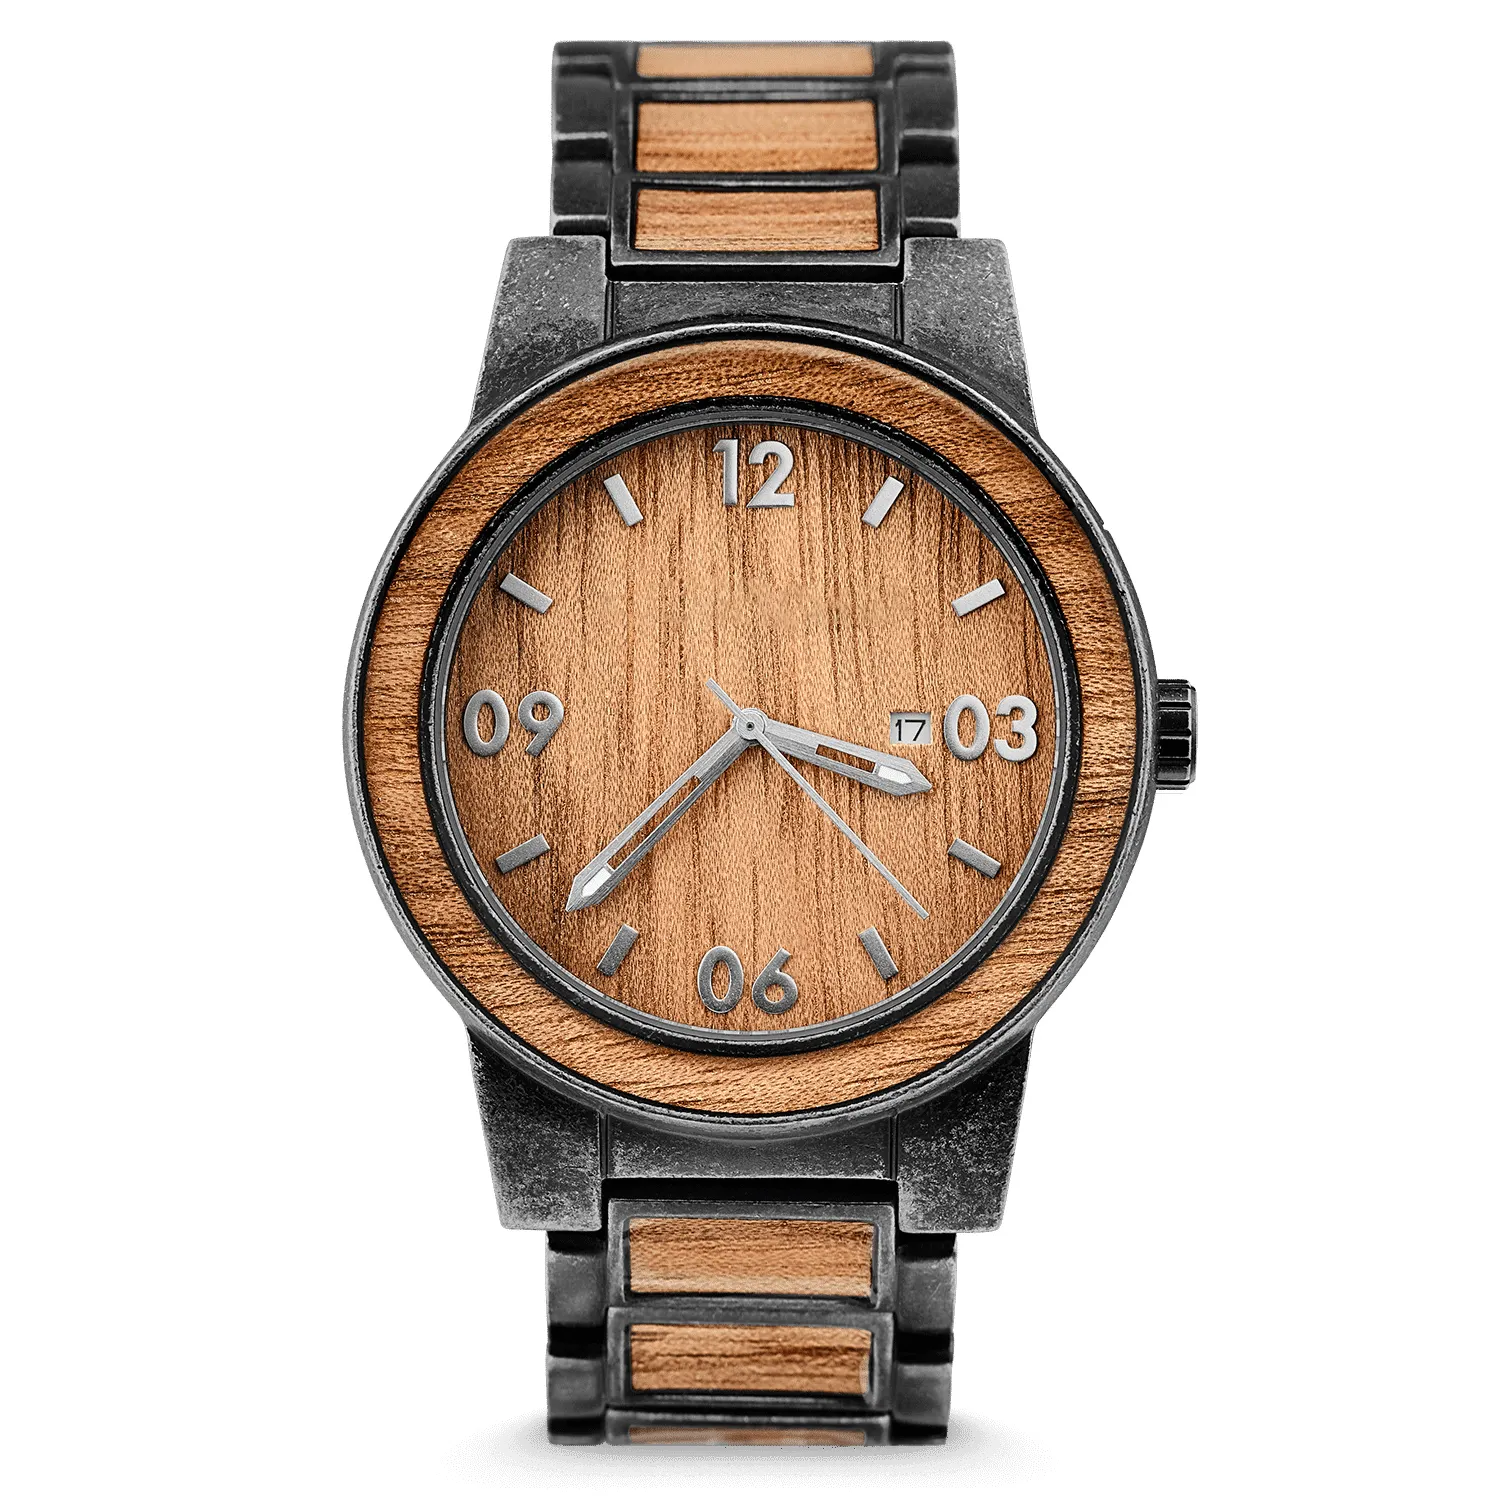 1 PC AVAILABLE ! BARREL WOODEN WRIST WATCH, WOODEN WATCHES FOR MEN,WOOD WATCHES MEN LUXURY